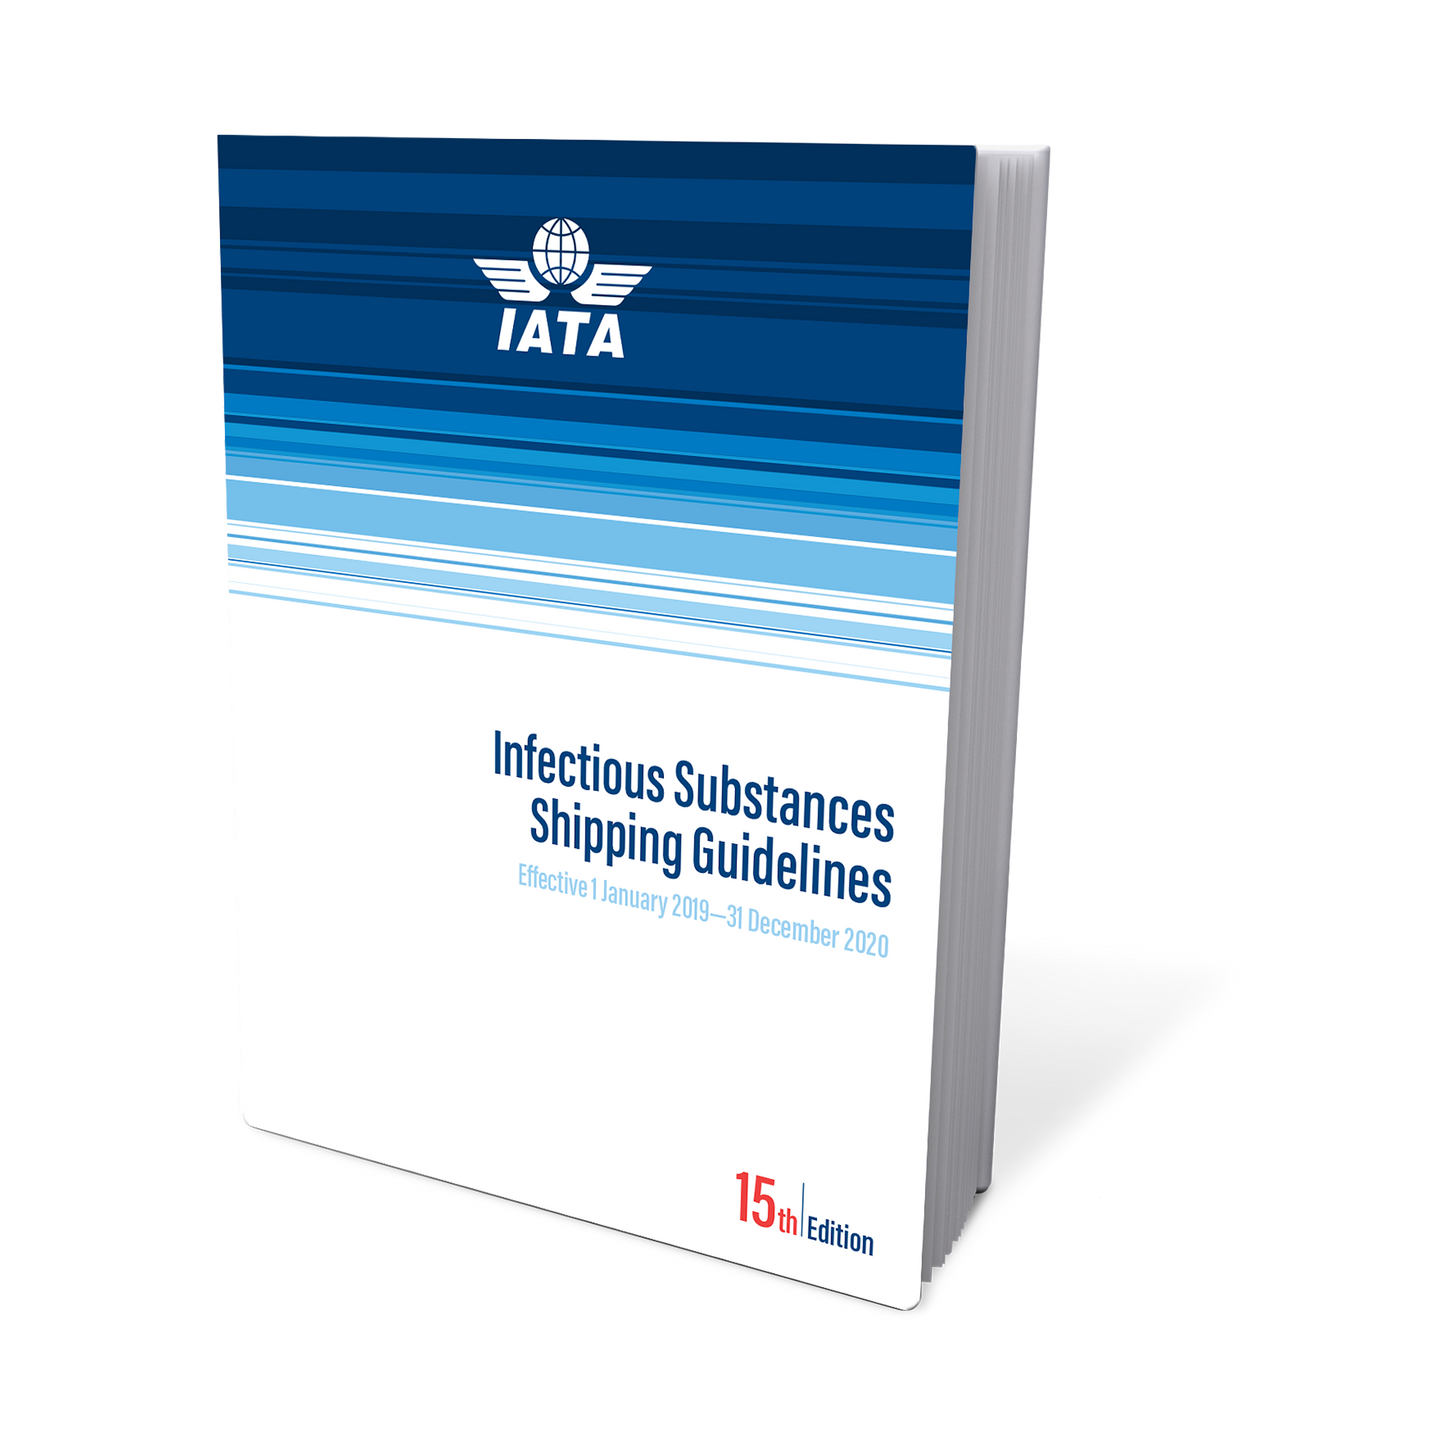 IATA - INFECTIOUS SUBSTANCE SHIPPING GUIDELINES